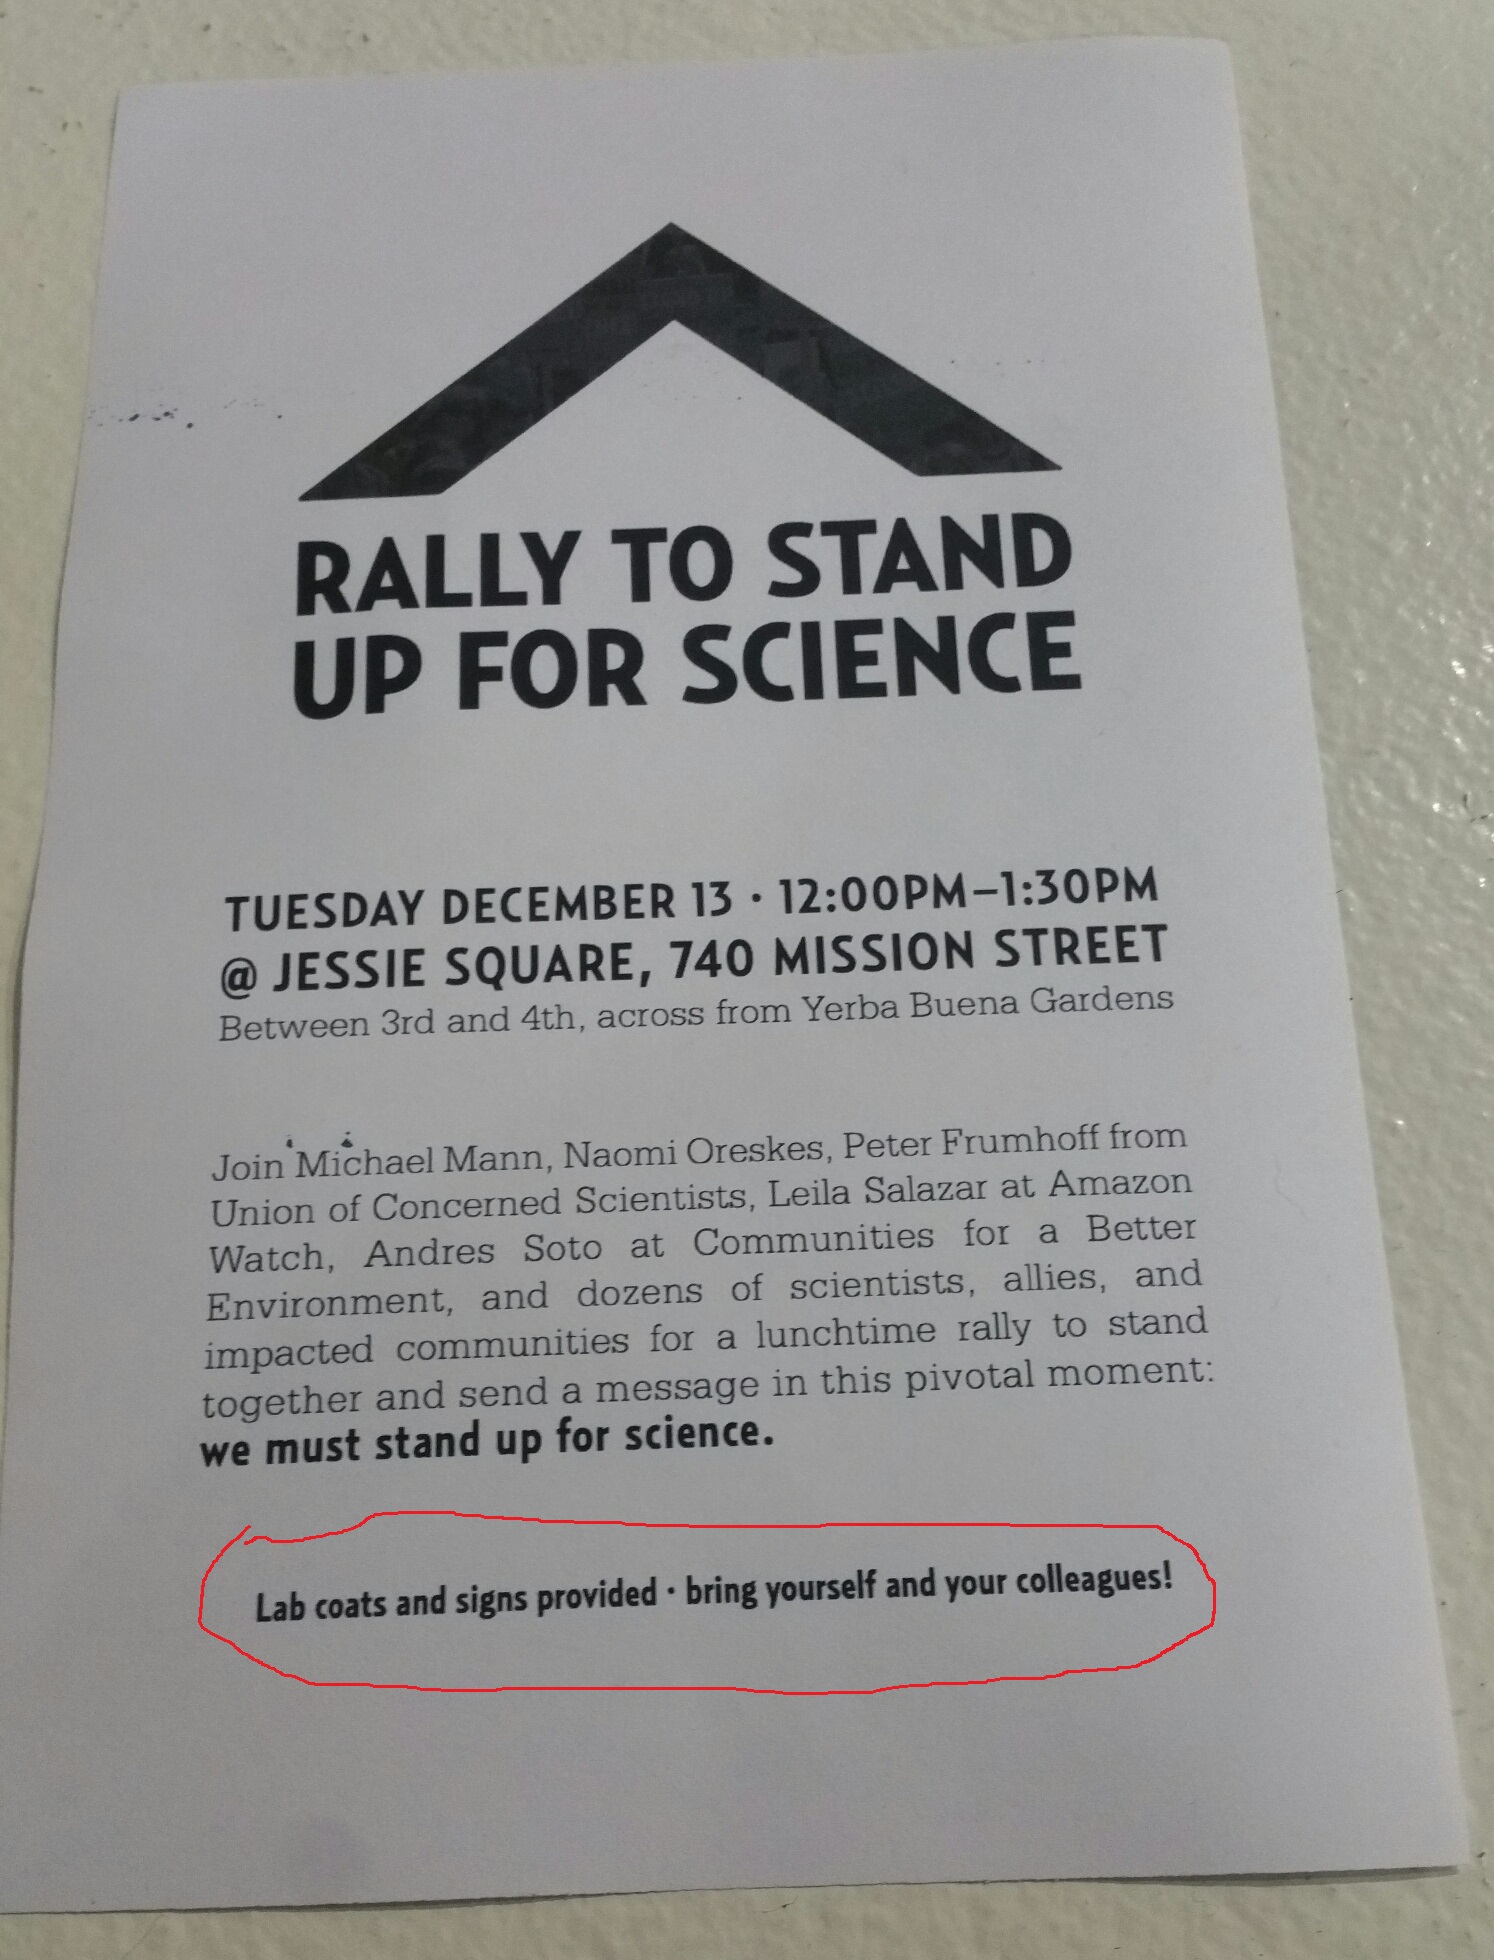 A poster advertising the rally and promising to provide lab coats and signs